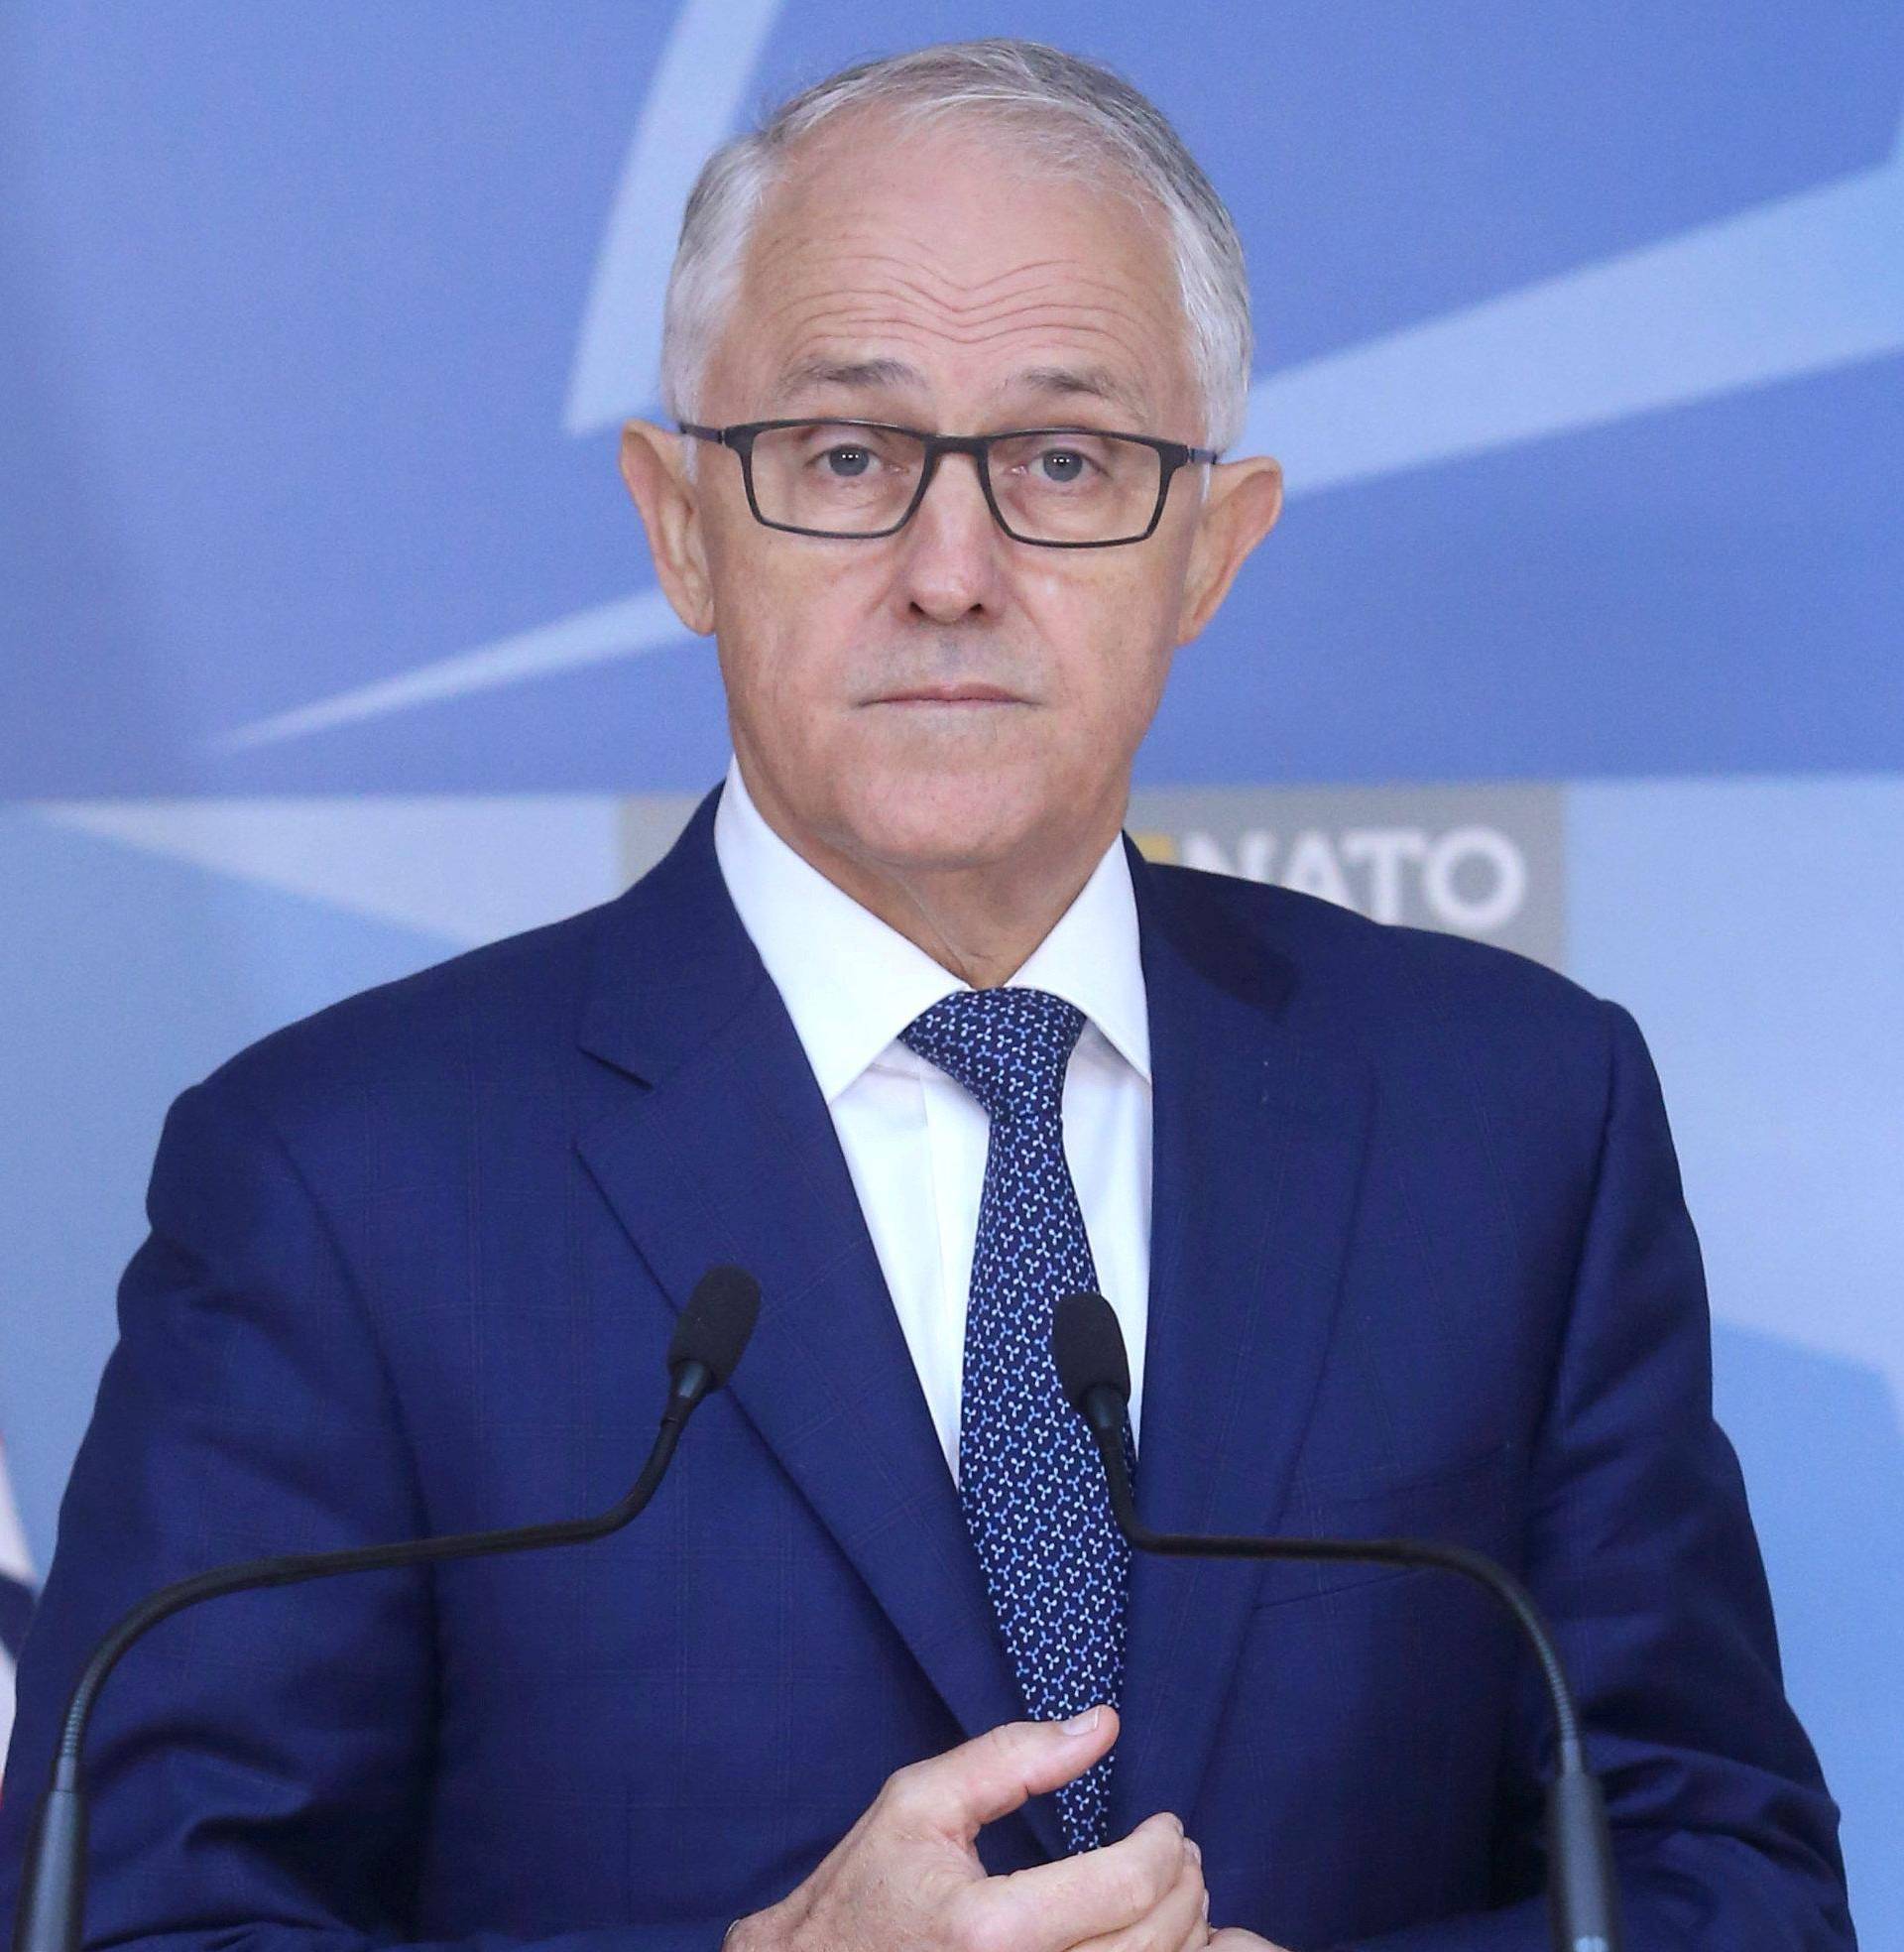 FILE PHOTO: Australian Prime Minister Malcolm Turnbull speaks at a news conference after a meeting with NATO Secretary-General Jens Stoltenberg at the Alliance's headquarters in Brussels